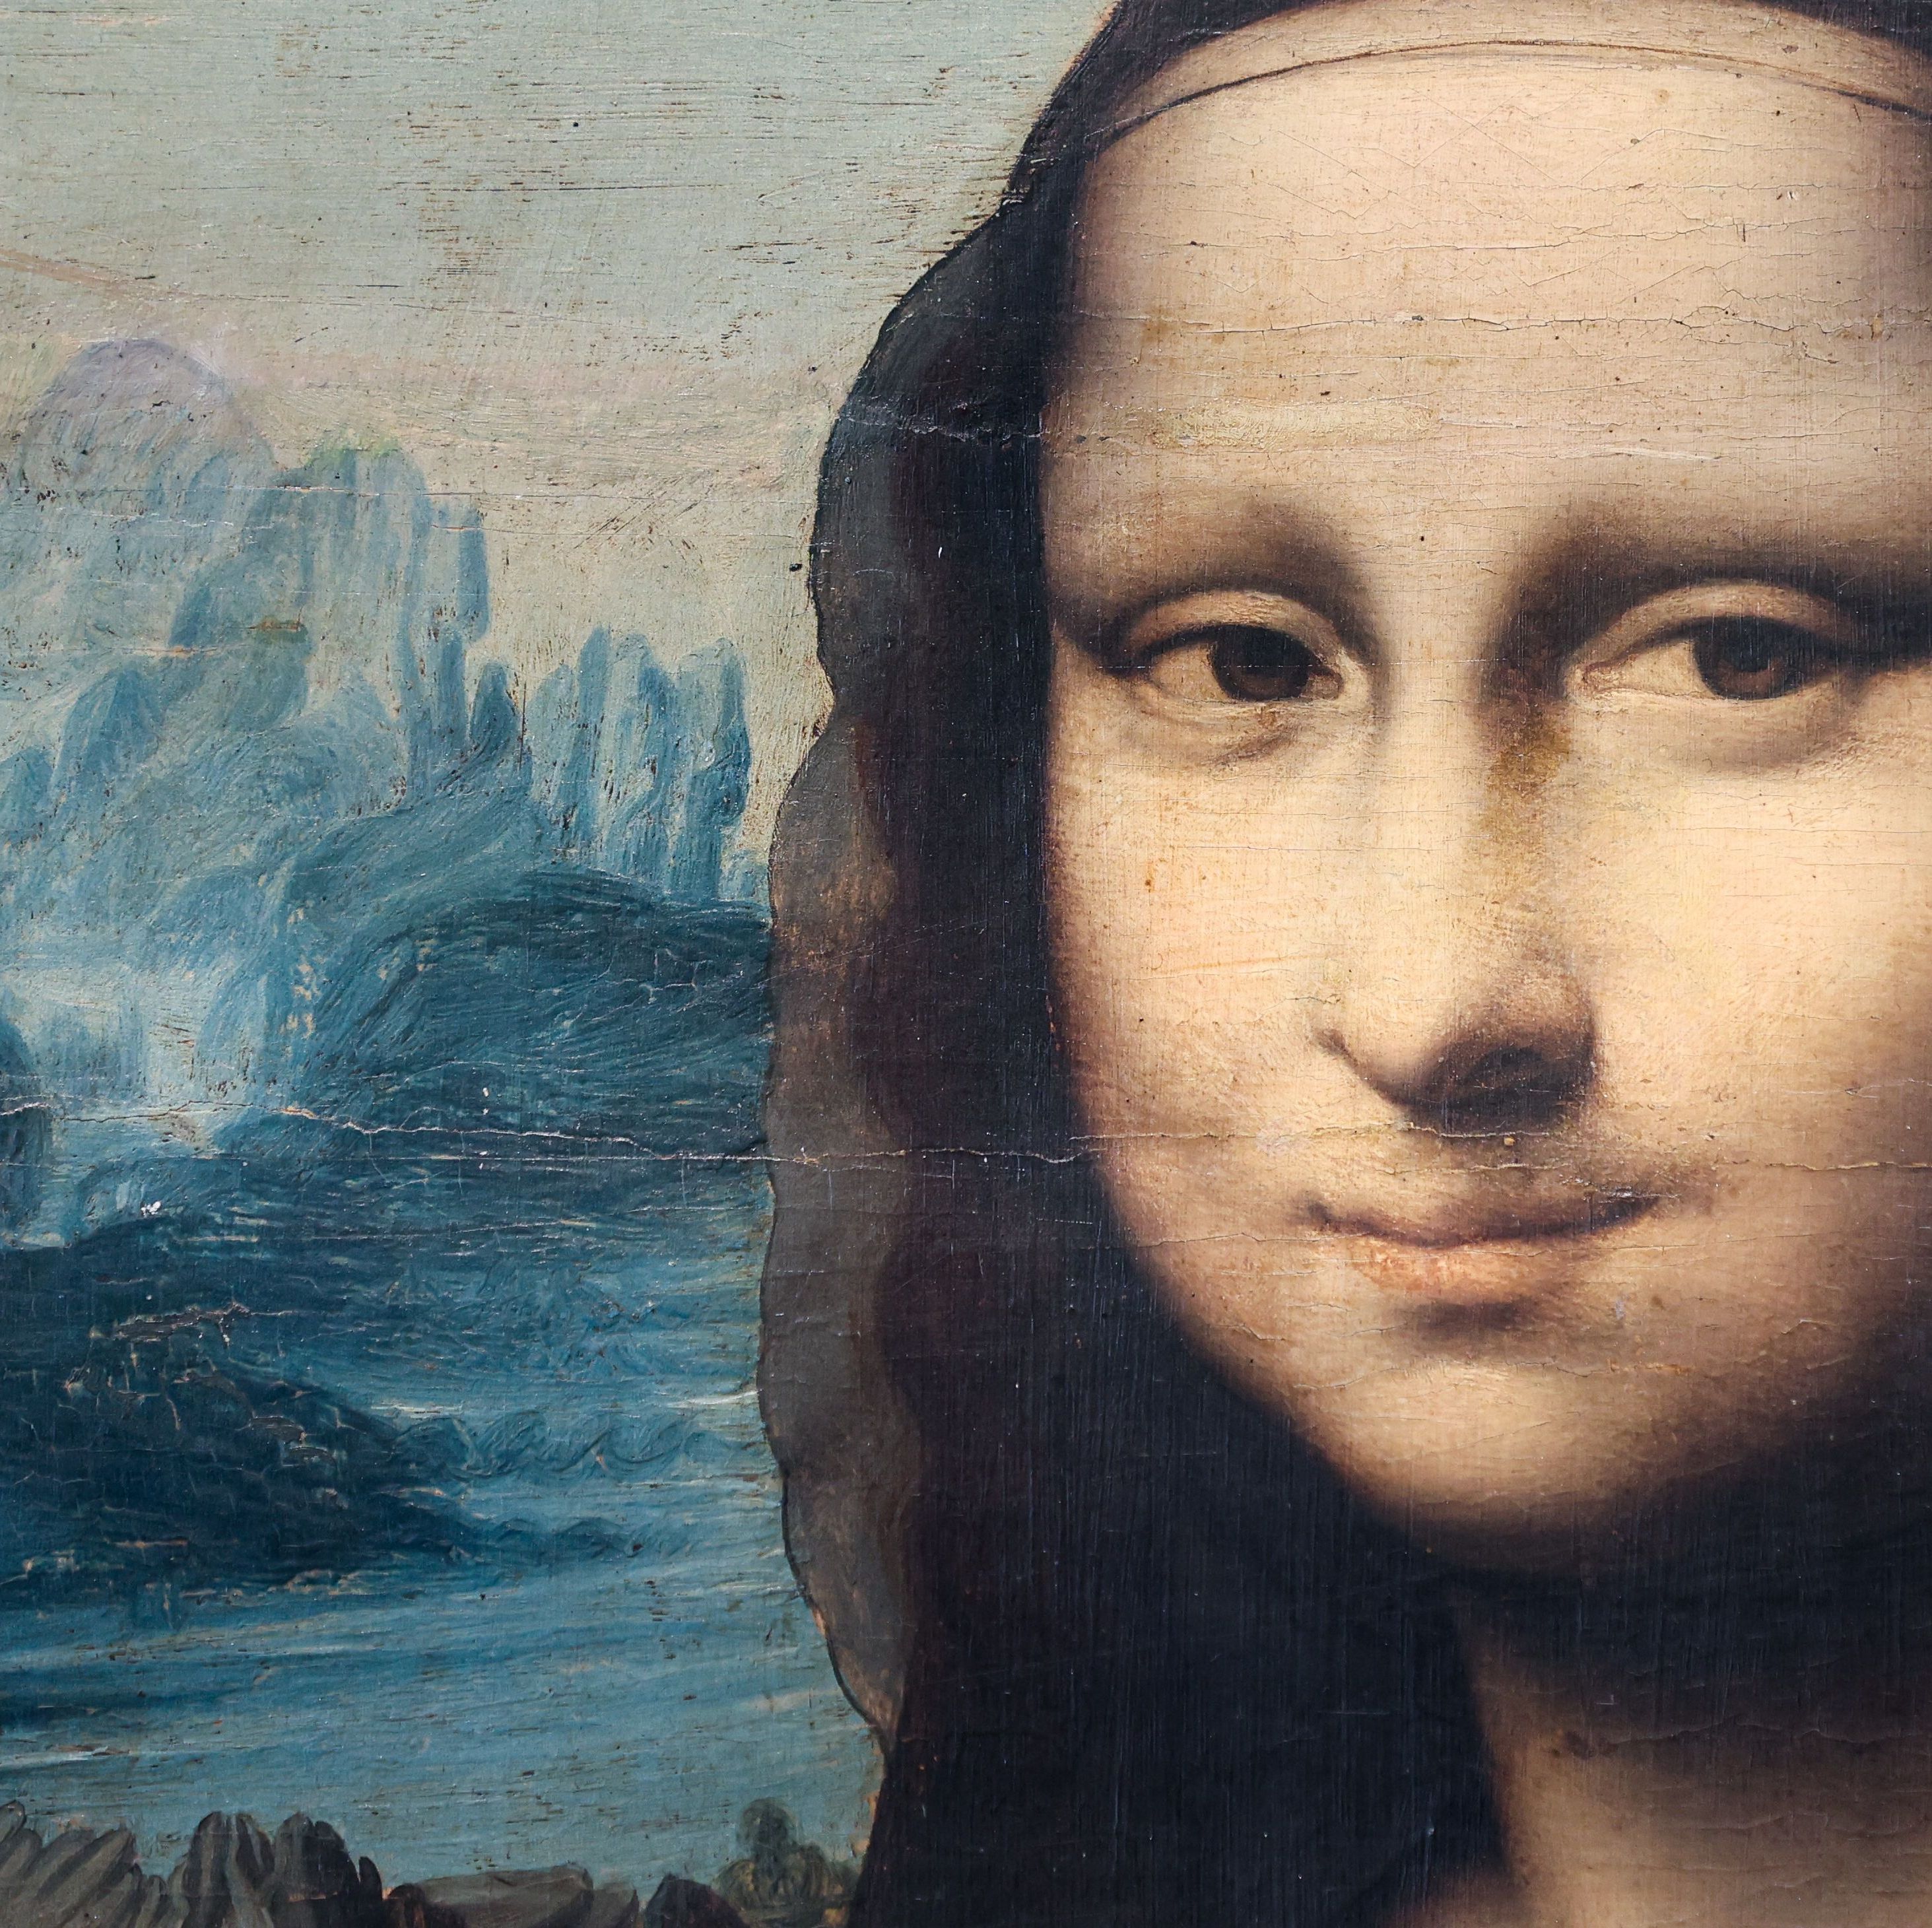 After 500+ Years, X-Rays Have Revealed an Amazing Secret Inside the Mona Lisa